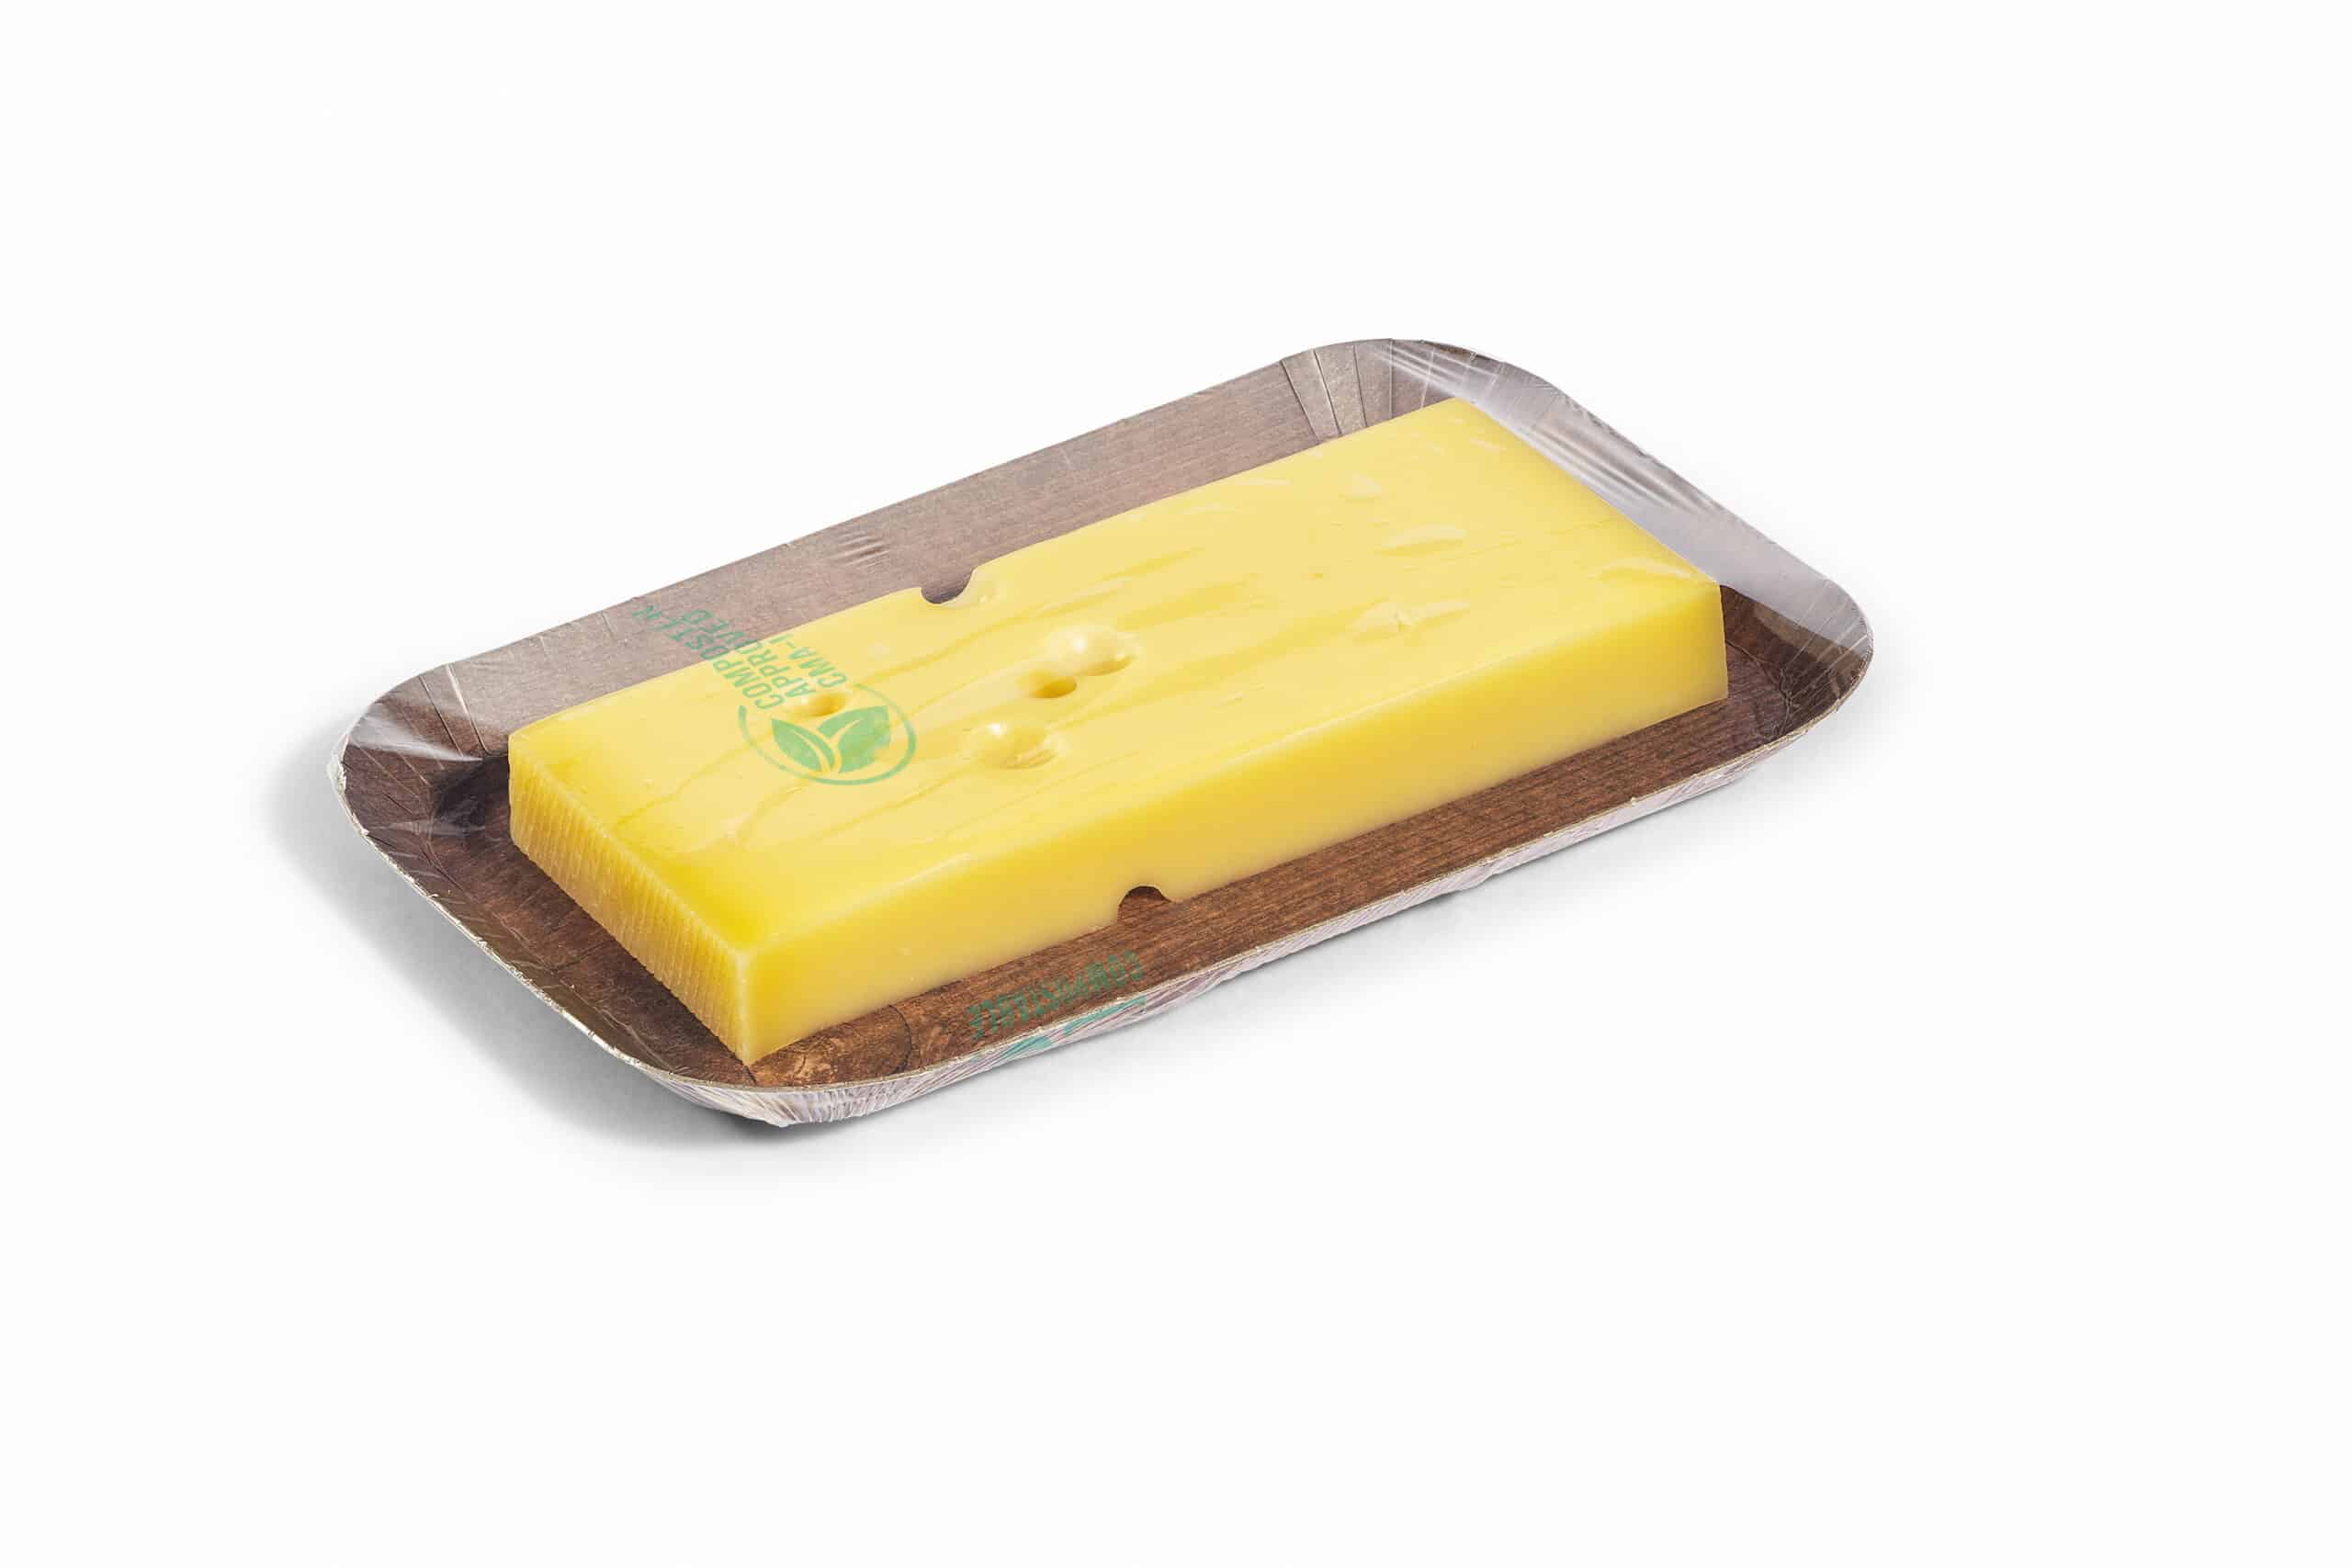 Compostable cling wrap covering cheese